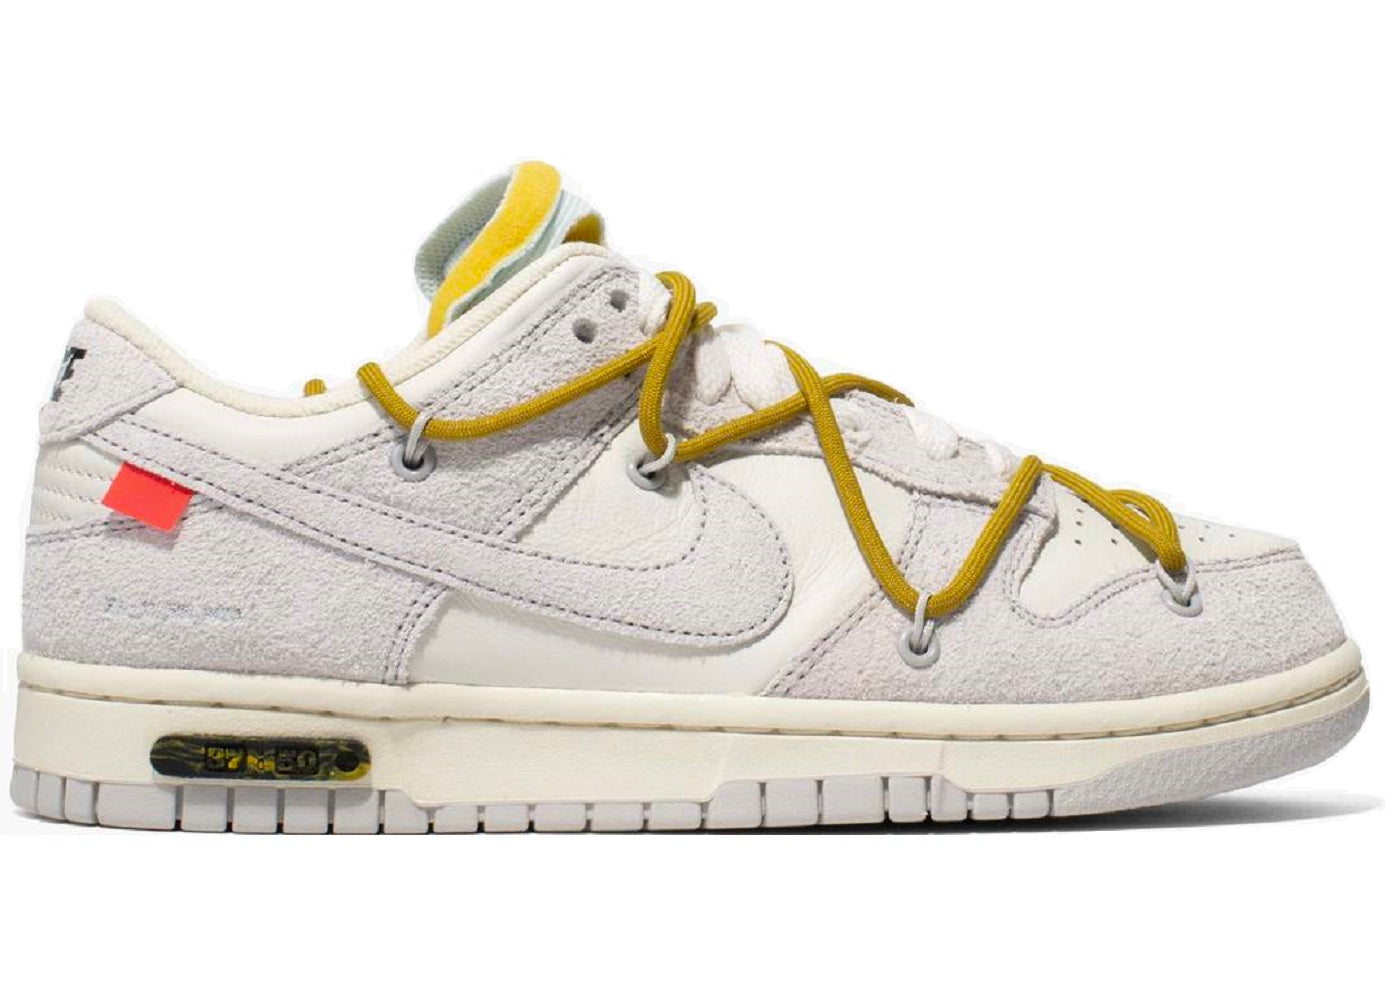 Nike x Off-White Dunk Low Lot 37 of 50